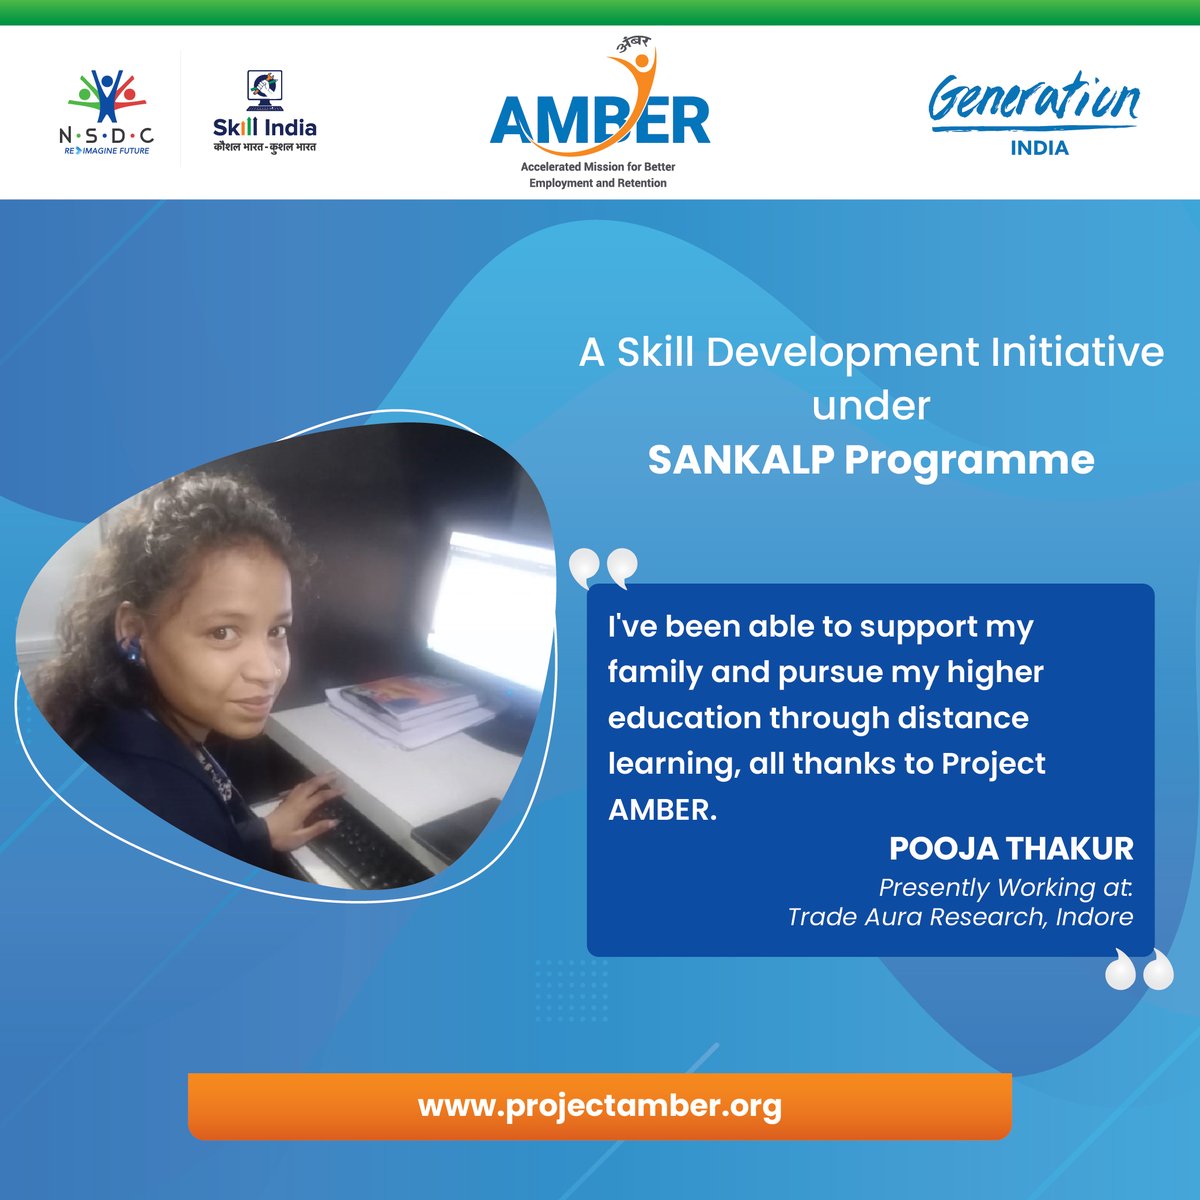 Pooja finished high school and wanted to help her family. She struggled to continue her education until she discovered Project AMBER's Customer Care Executive program.  #SkillsTraining #SuccessStory #EmpoweringCommunities #Gratitude